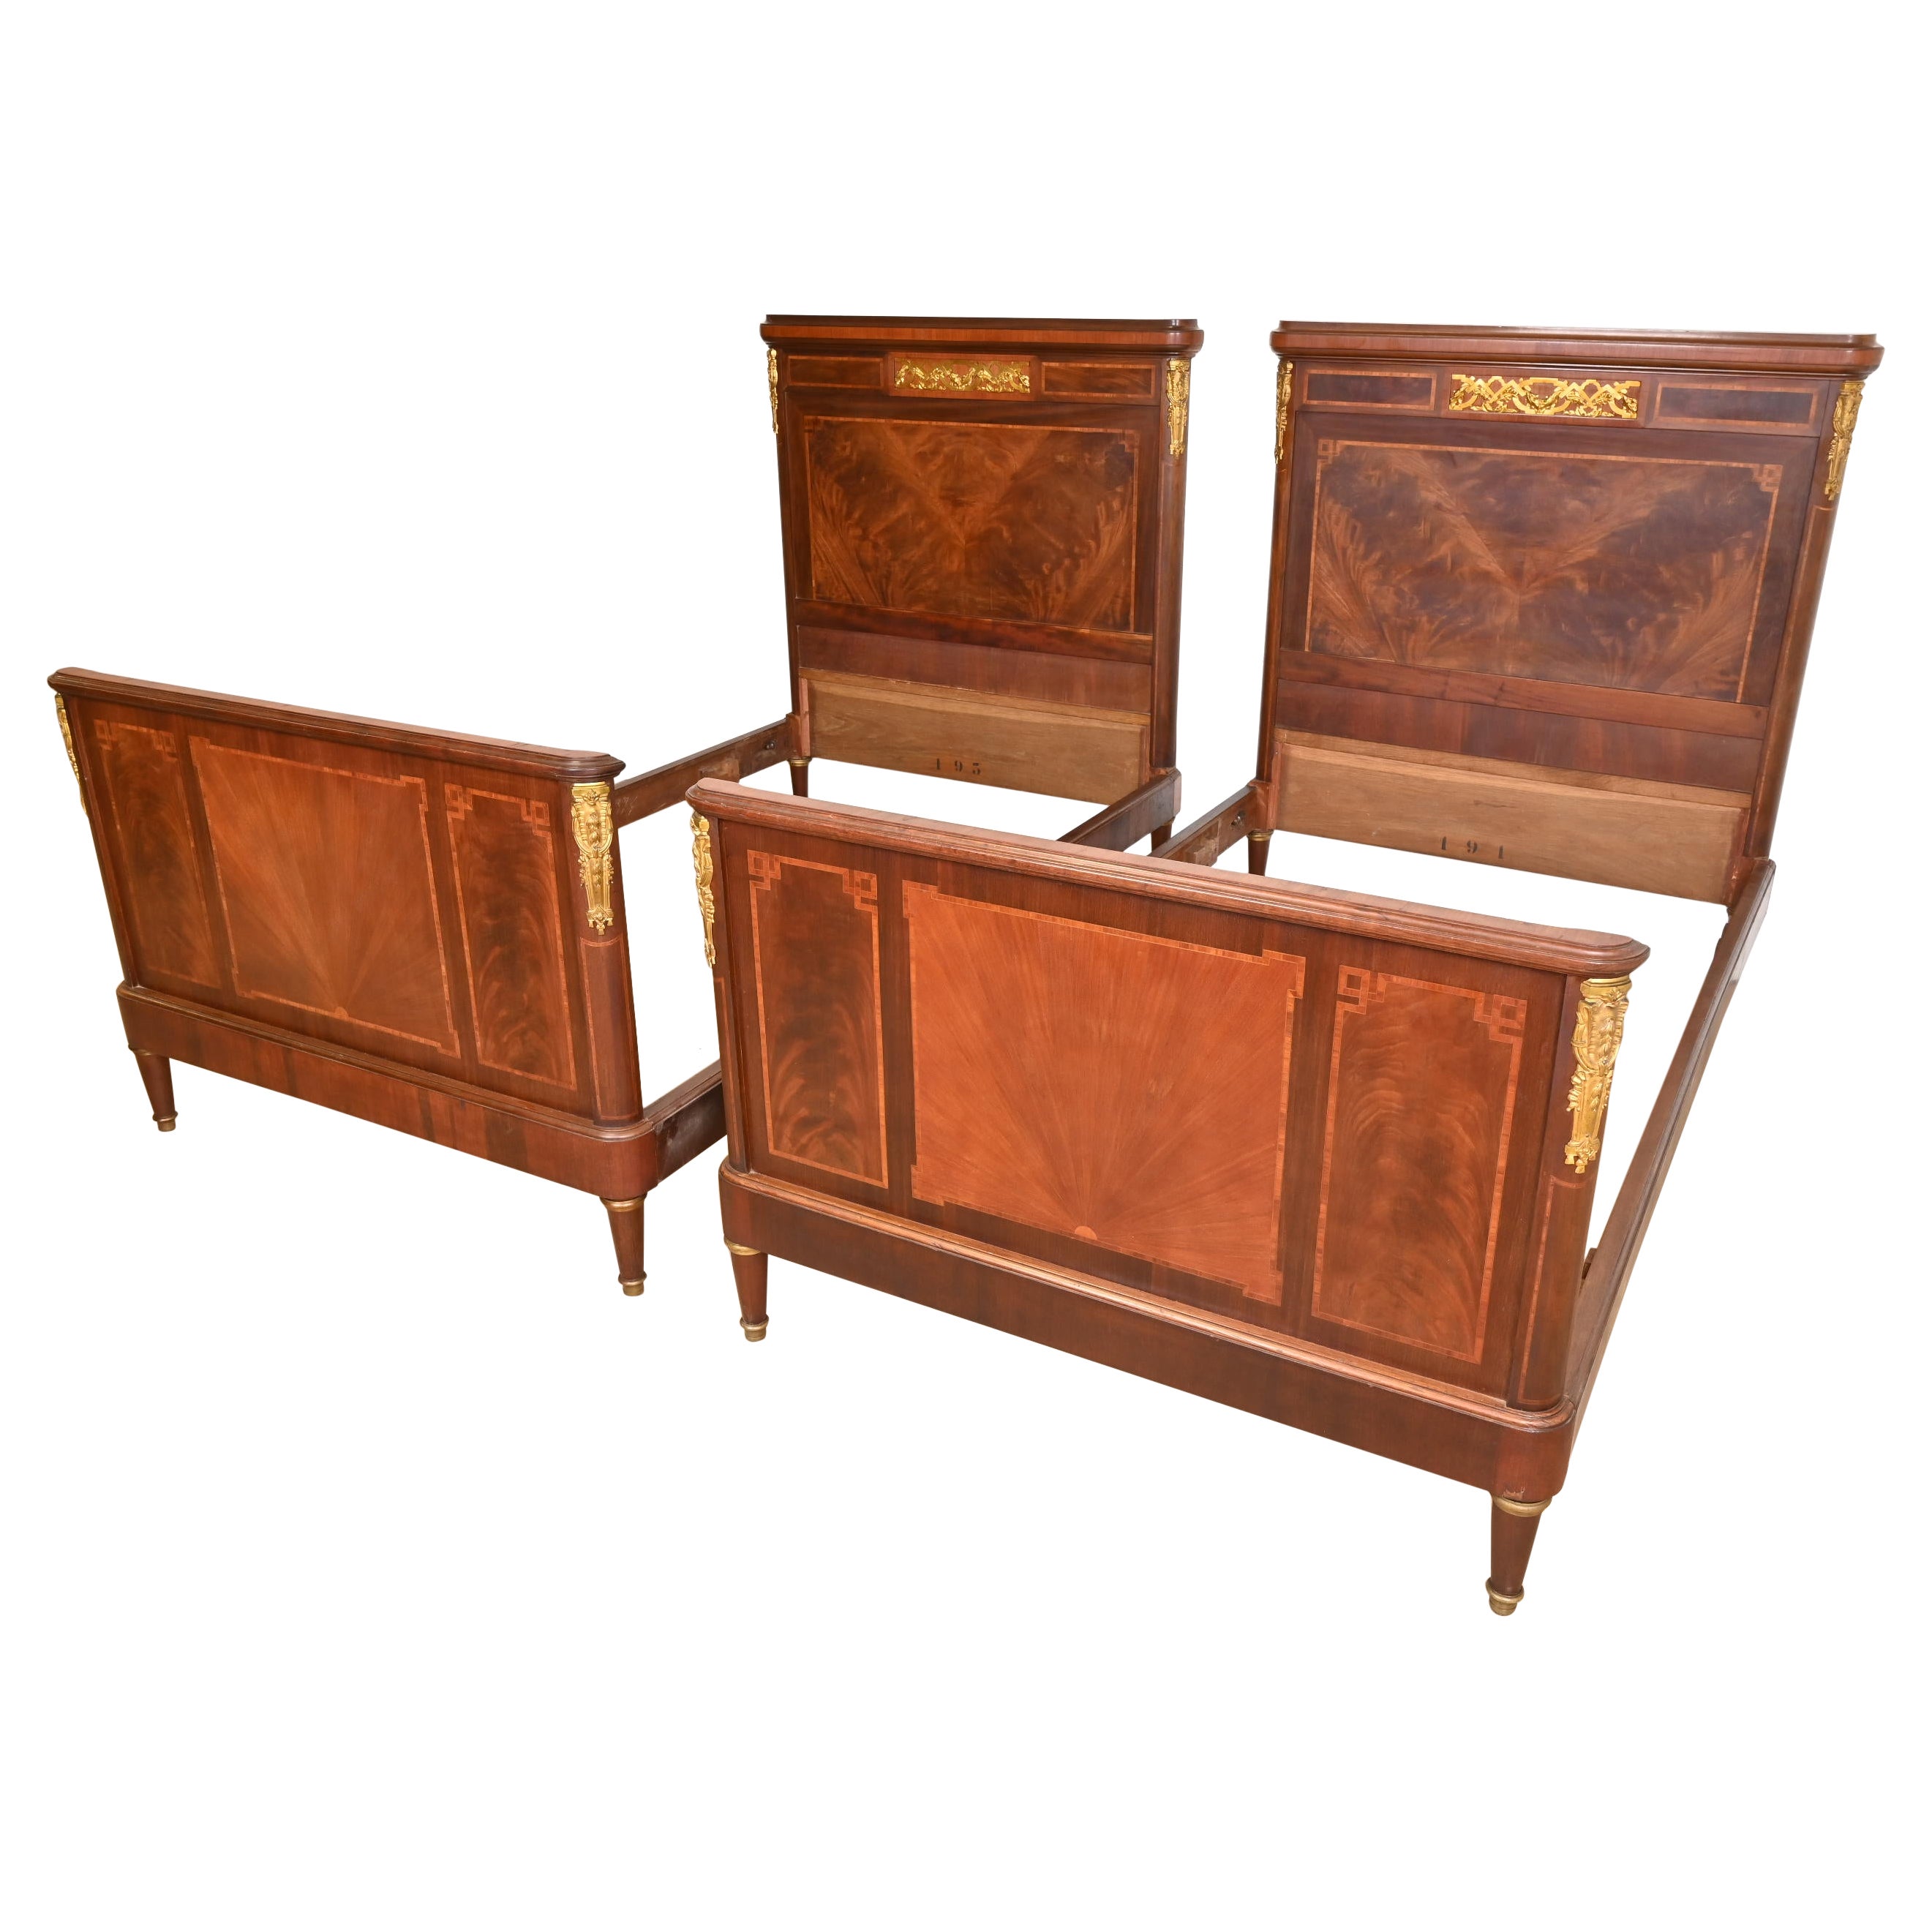 Antique French Regency Louis XVI Inlaid Flame Mahogany Bronze Mounted Twin Beds For Sale